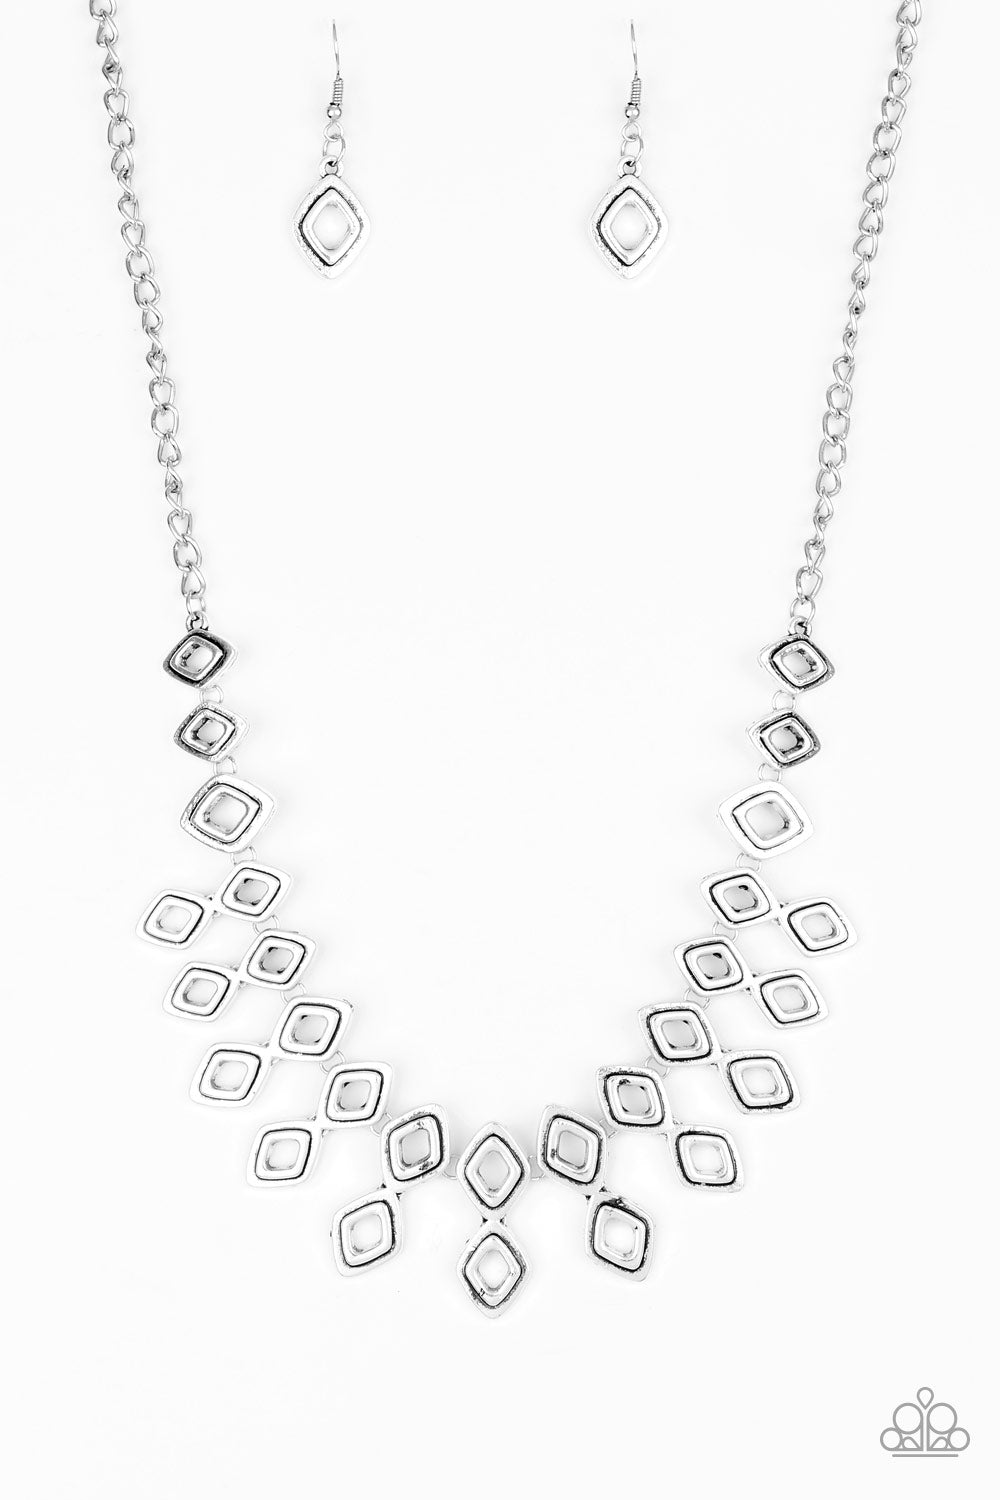 Geocentric Silver
Necklace - Daria's Blings N Things